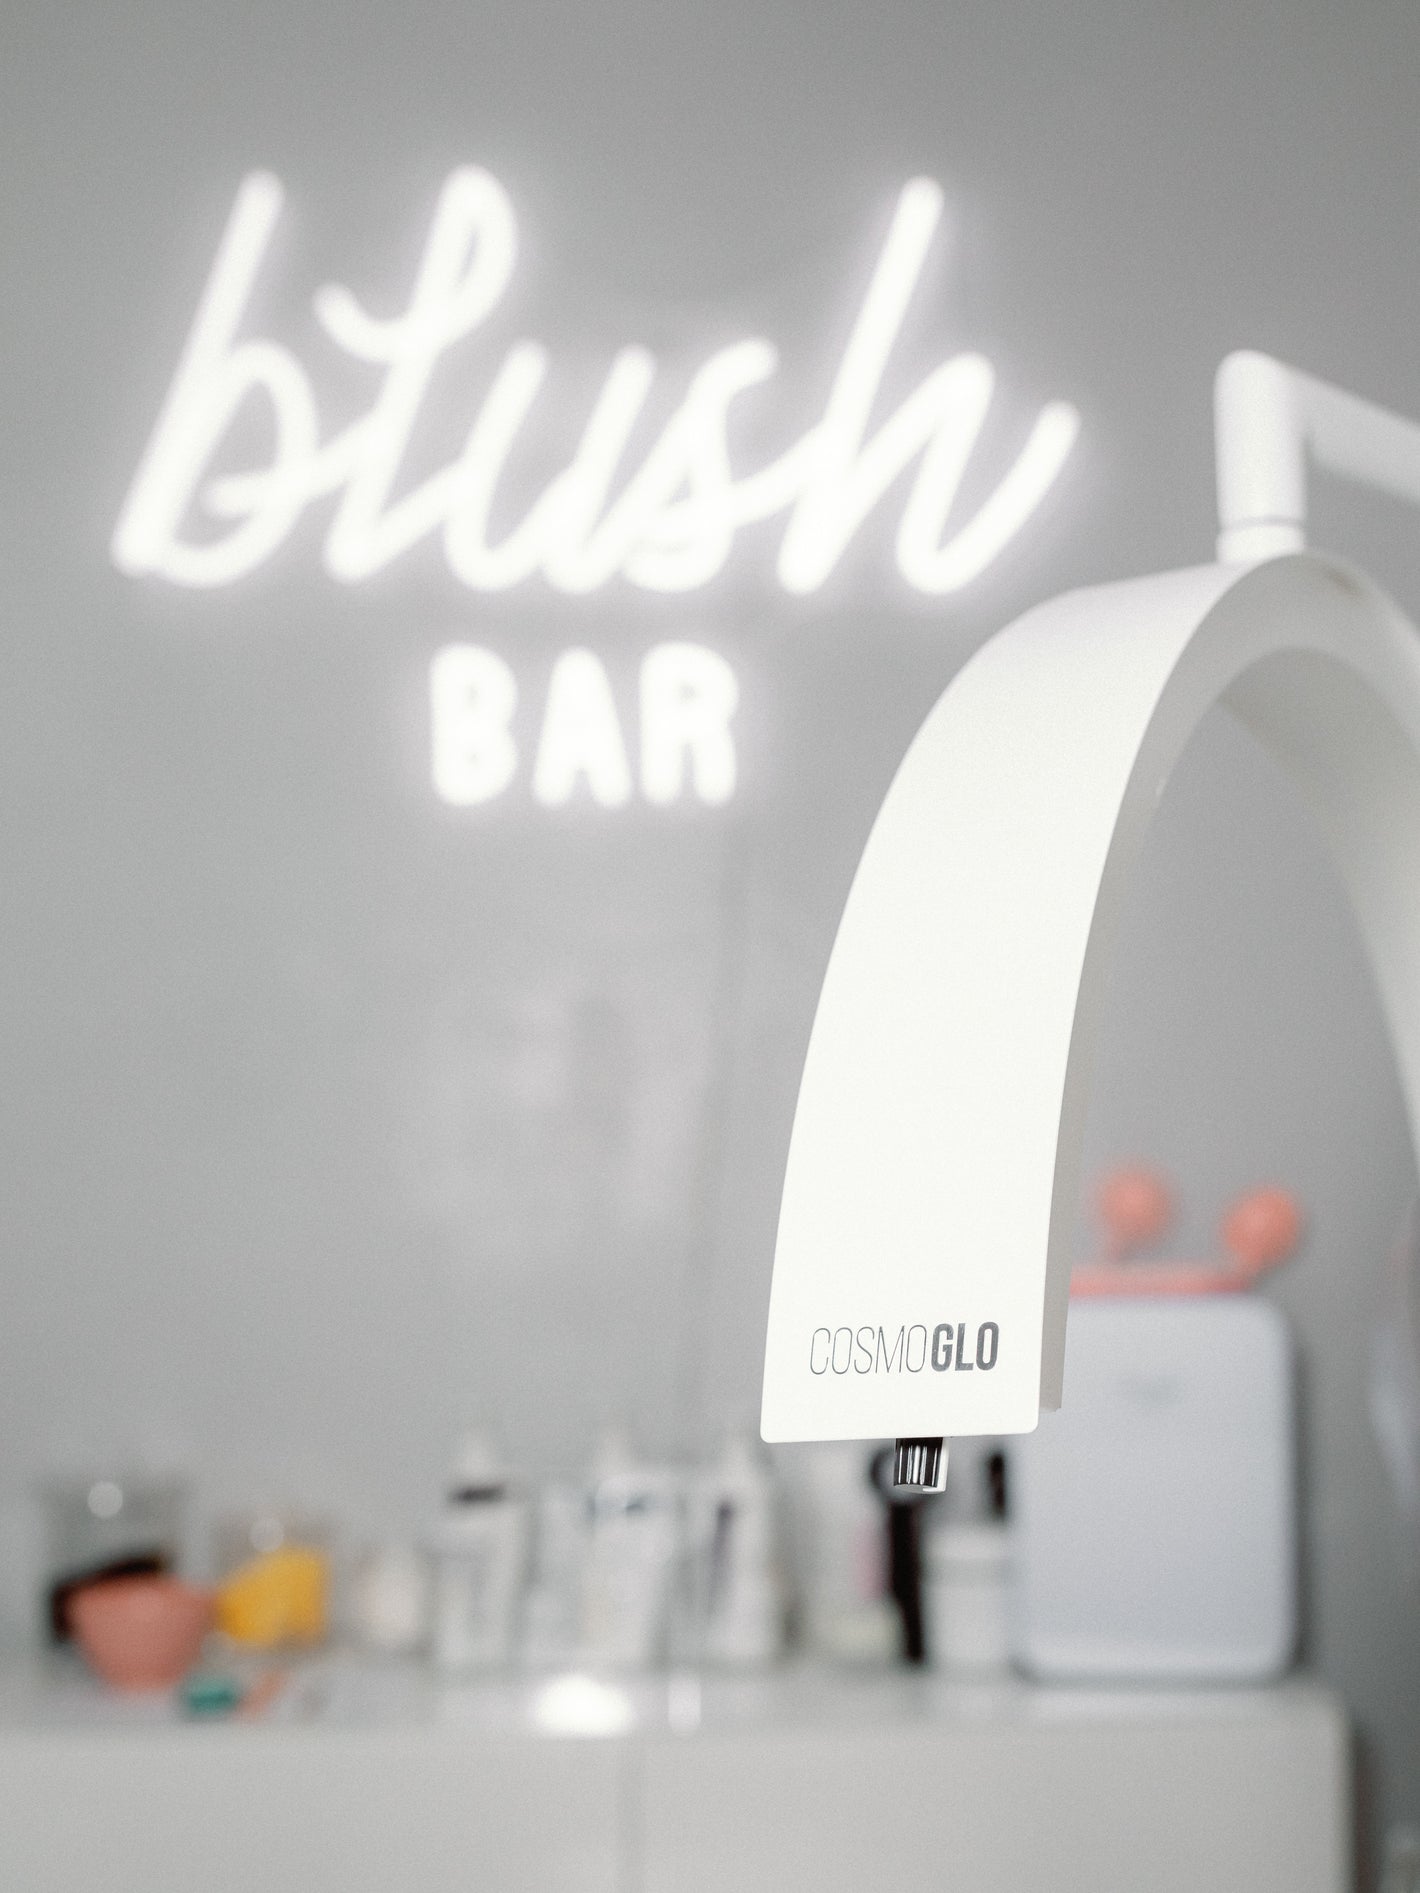 Link to learn about Blush Bar in Stockton, CA